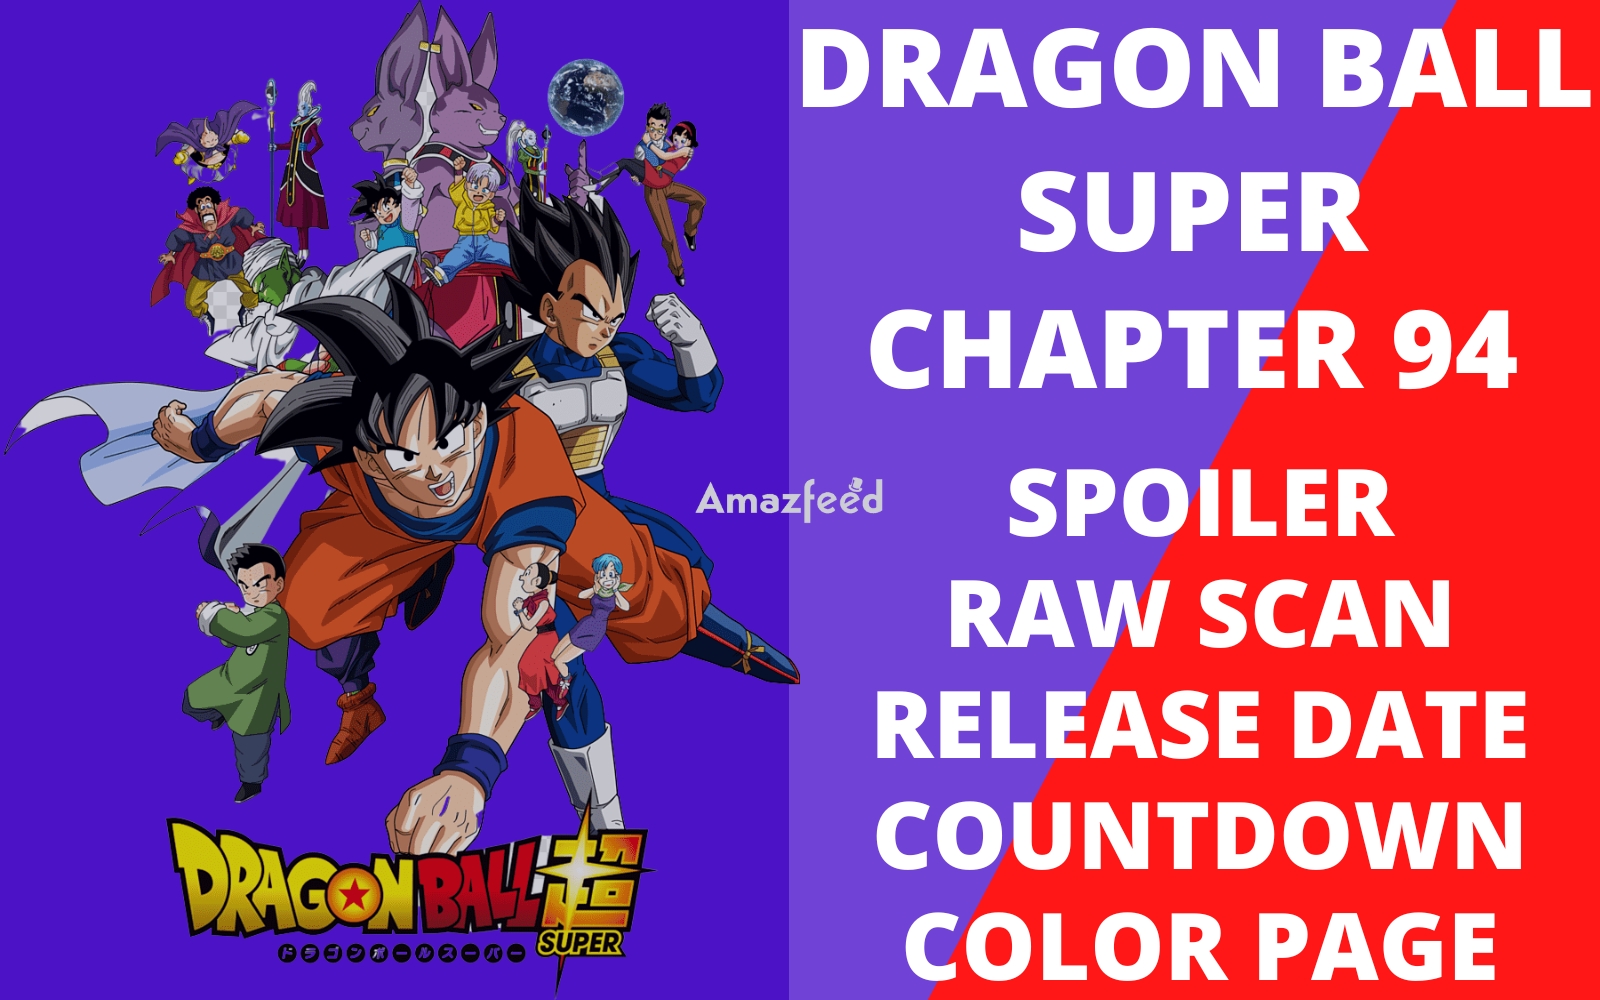 Dragon Ball Super chapter 100 previews one page ahead of its release